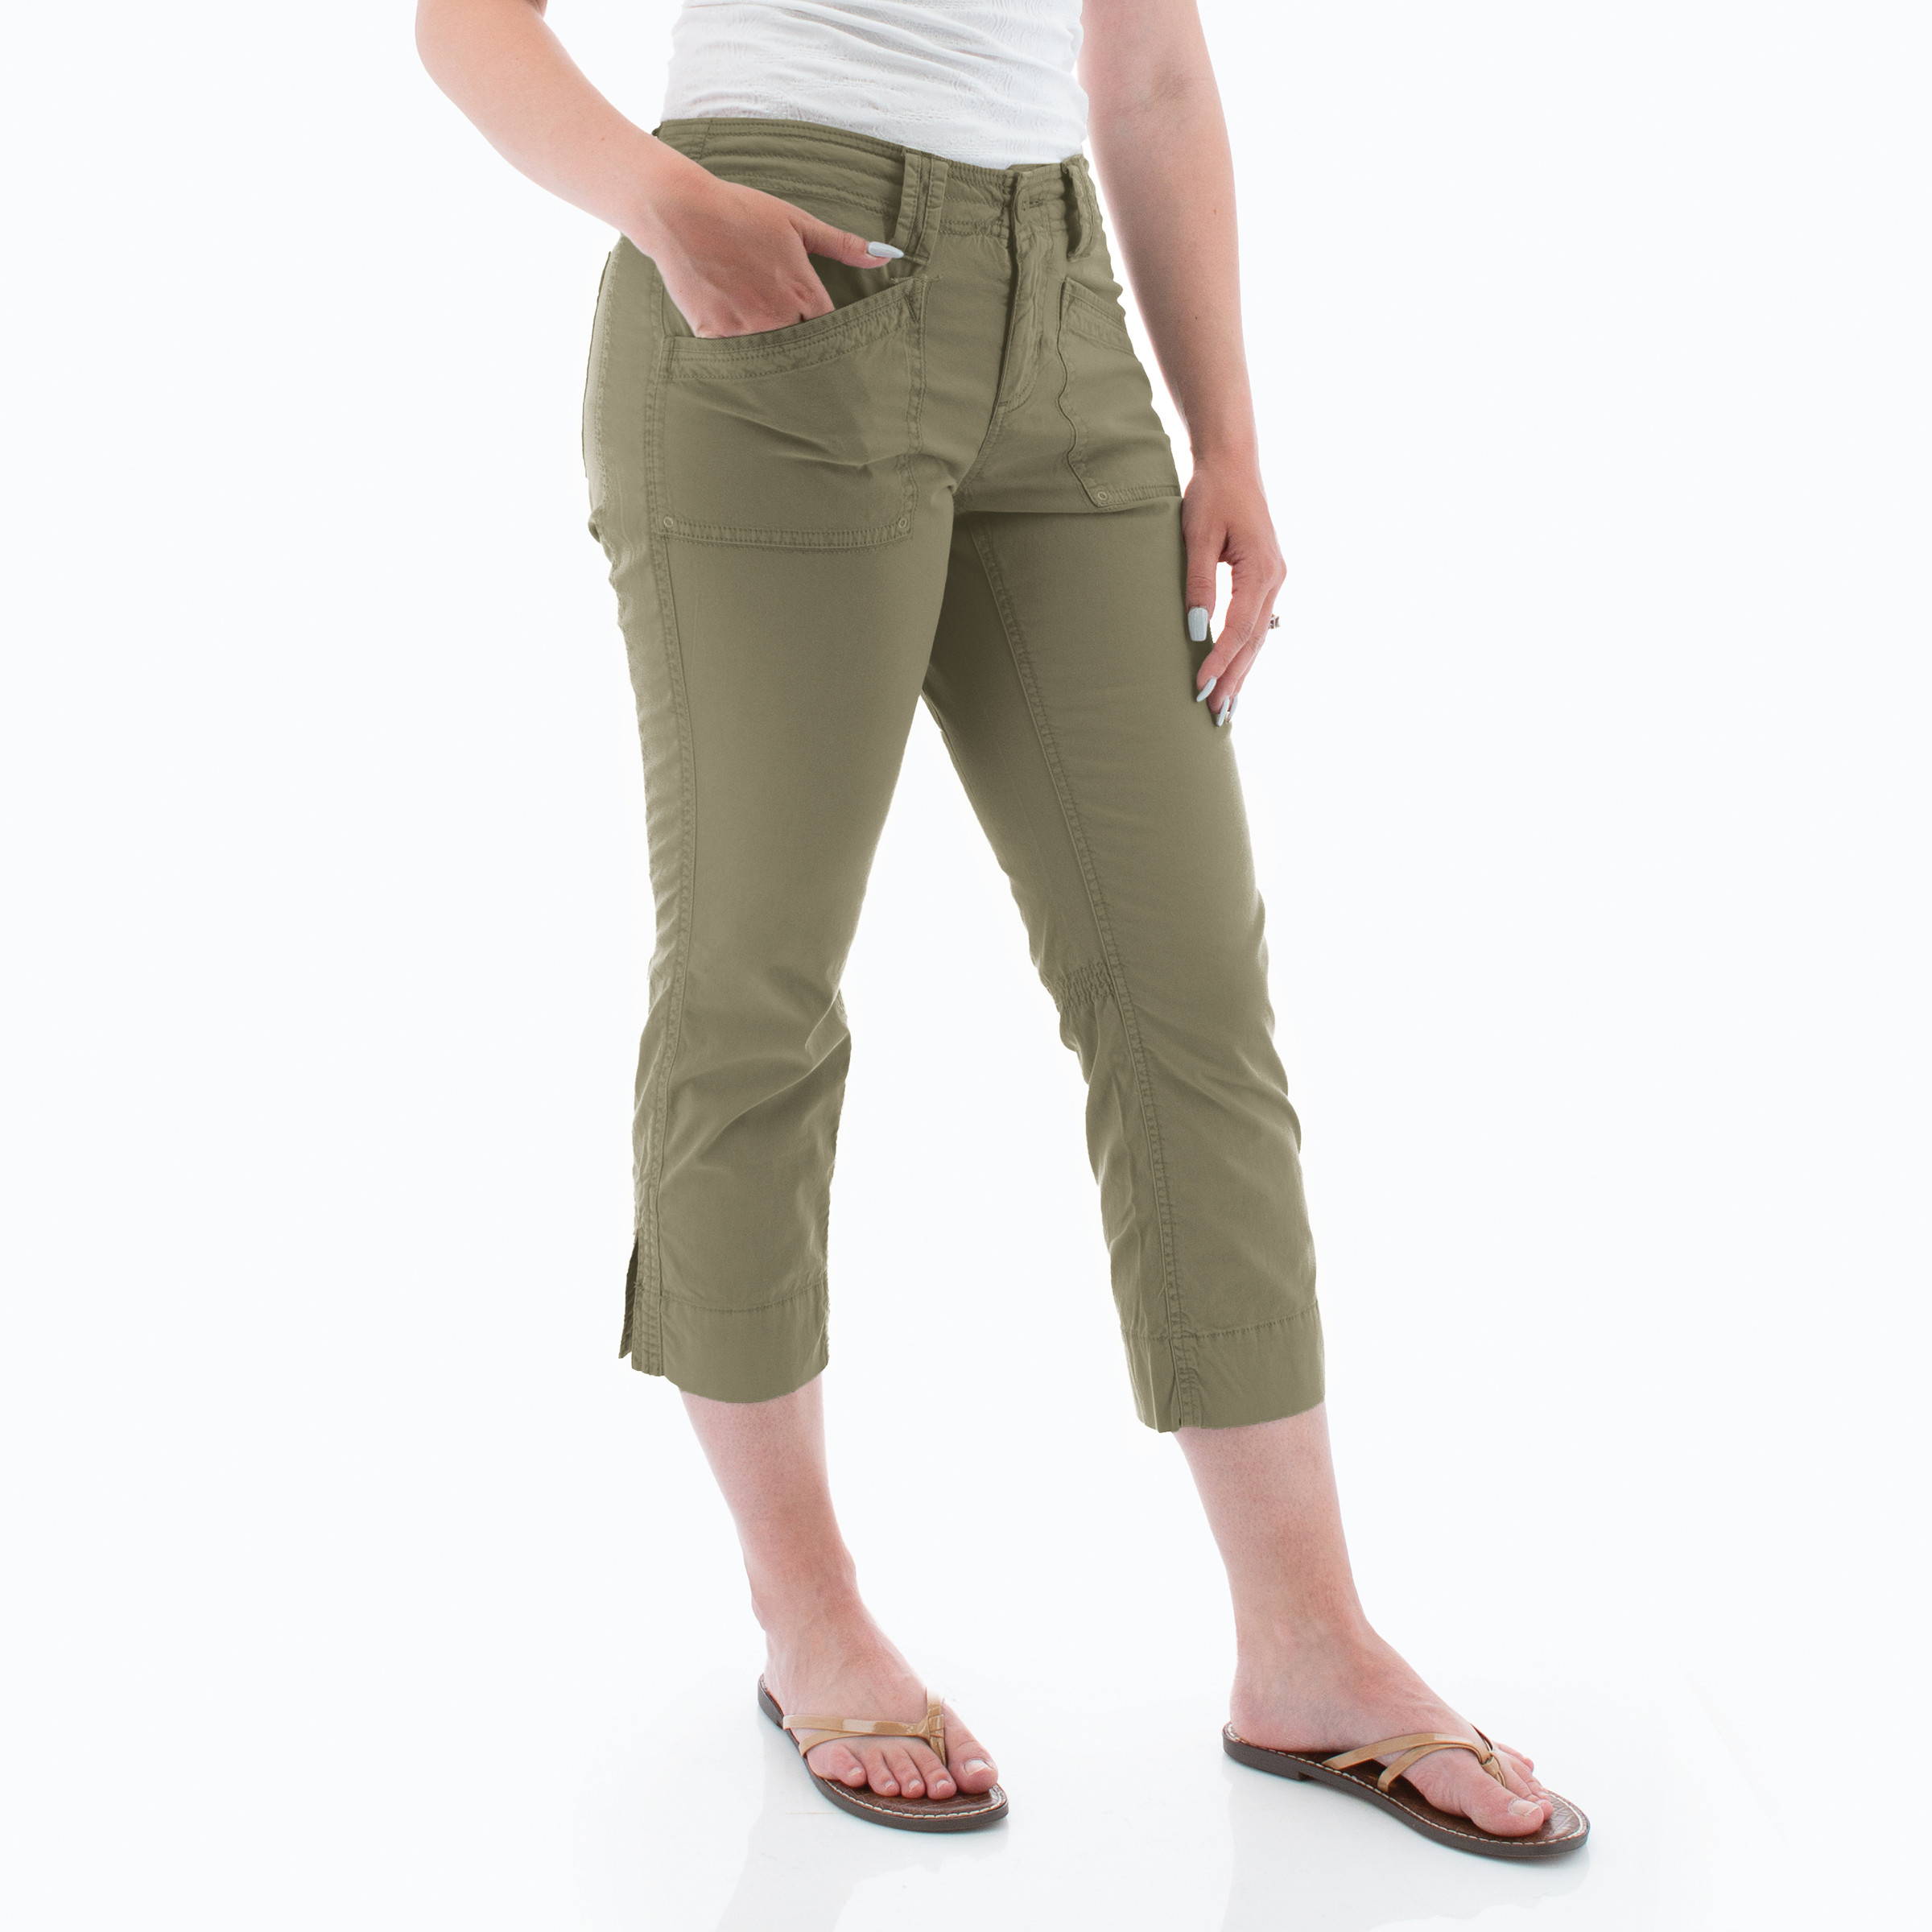 Detail view of Arden Crop Pant in green.